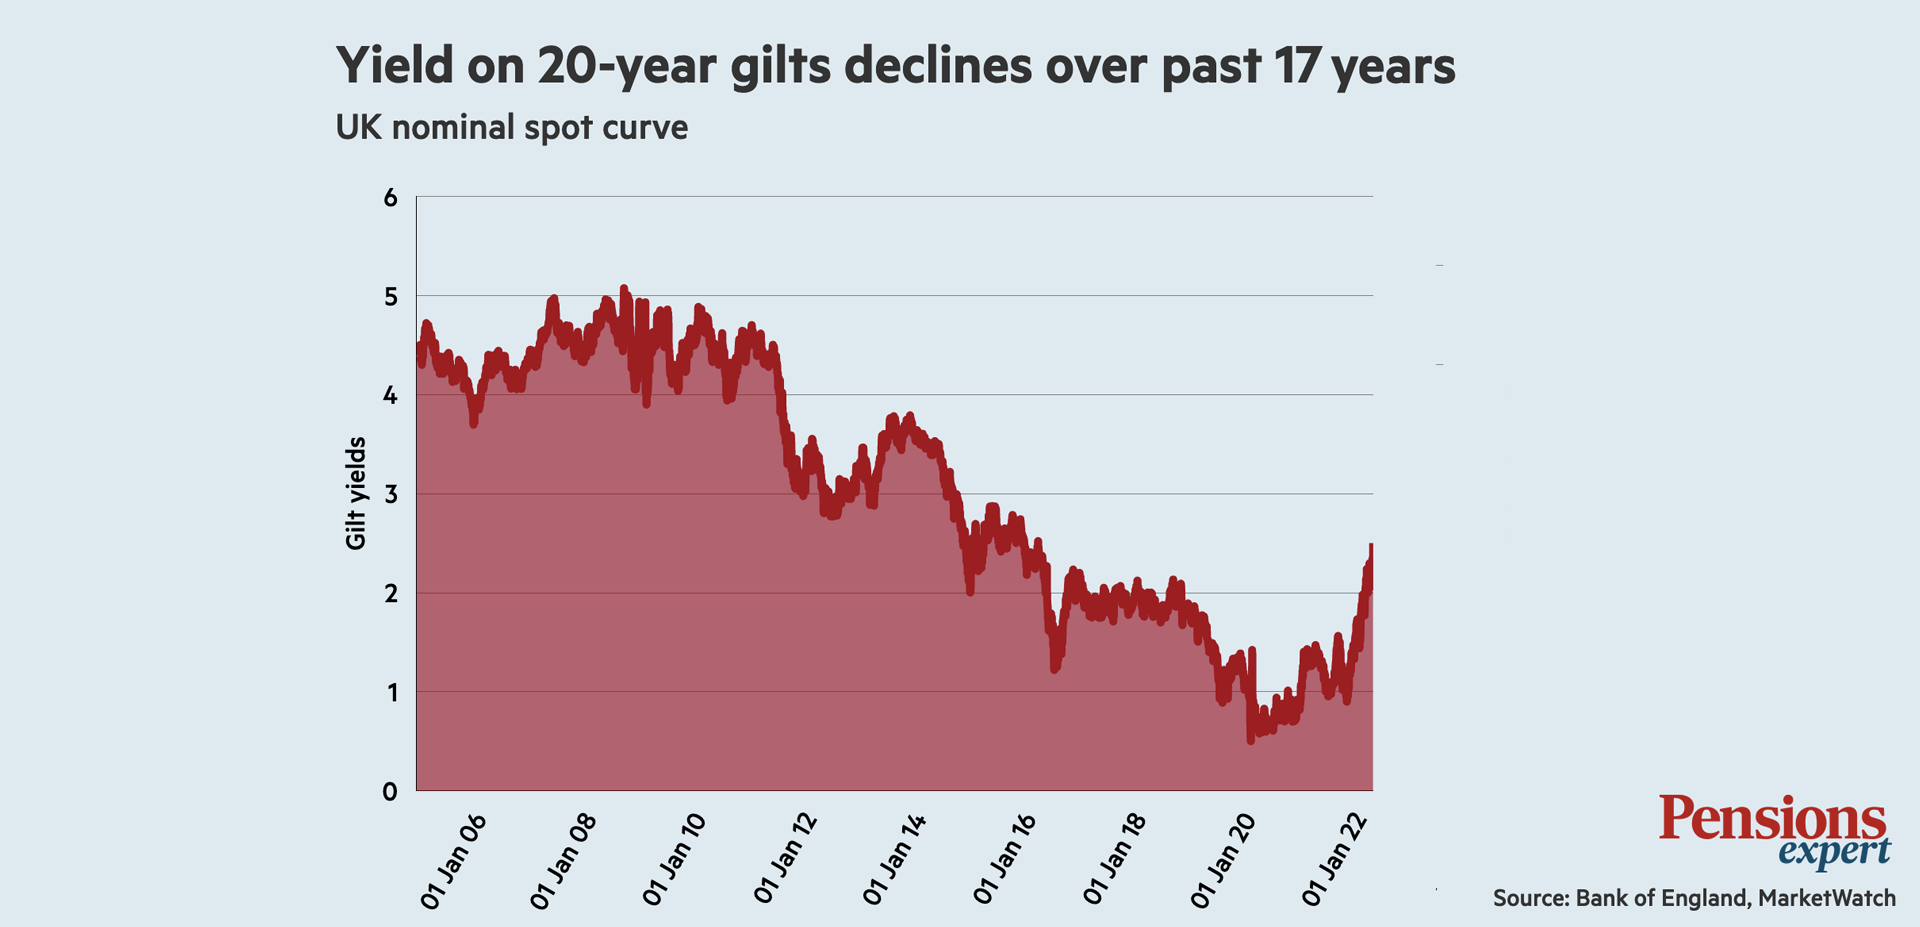 Yield on 20-year gilts declines over past 17 years